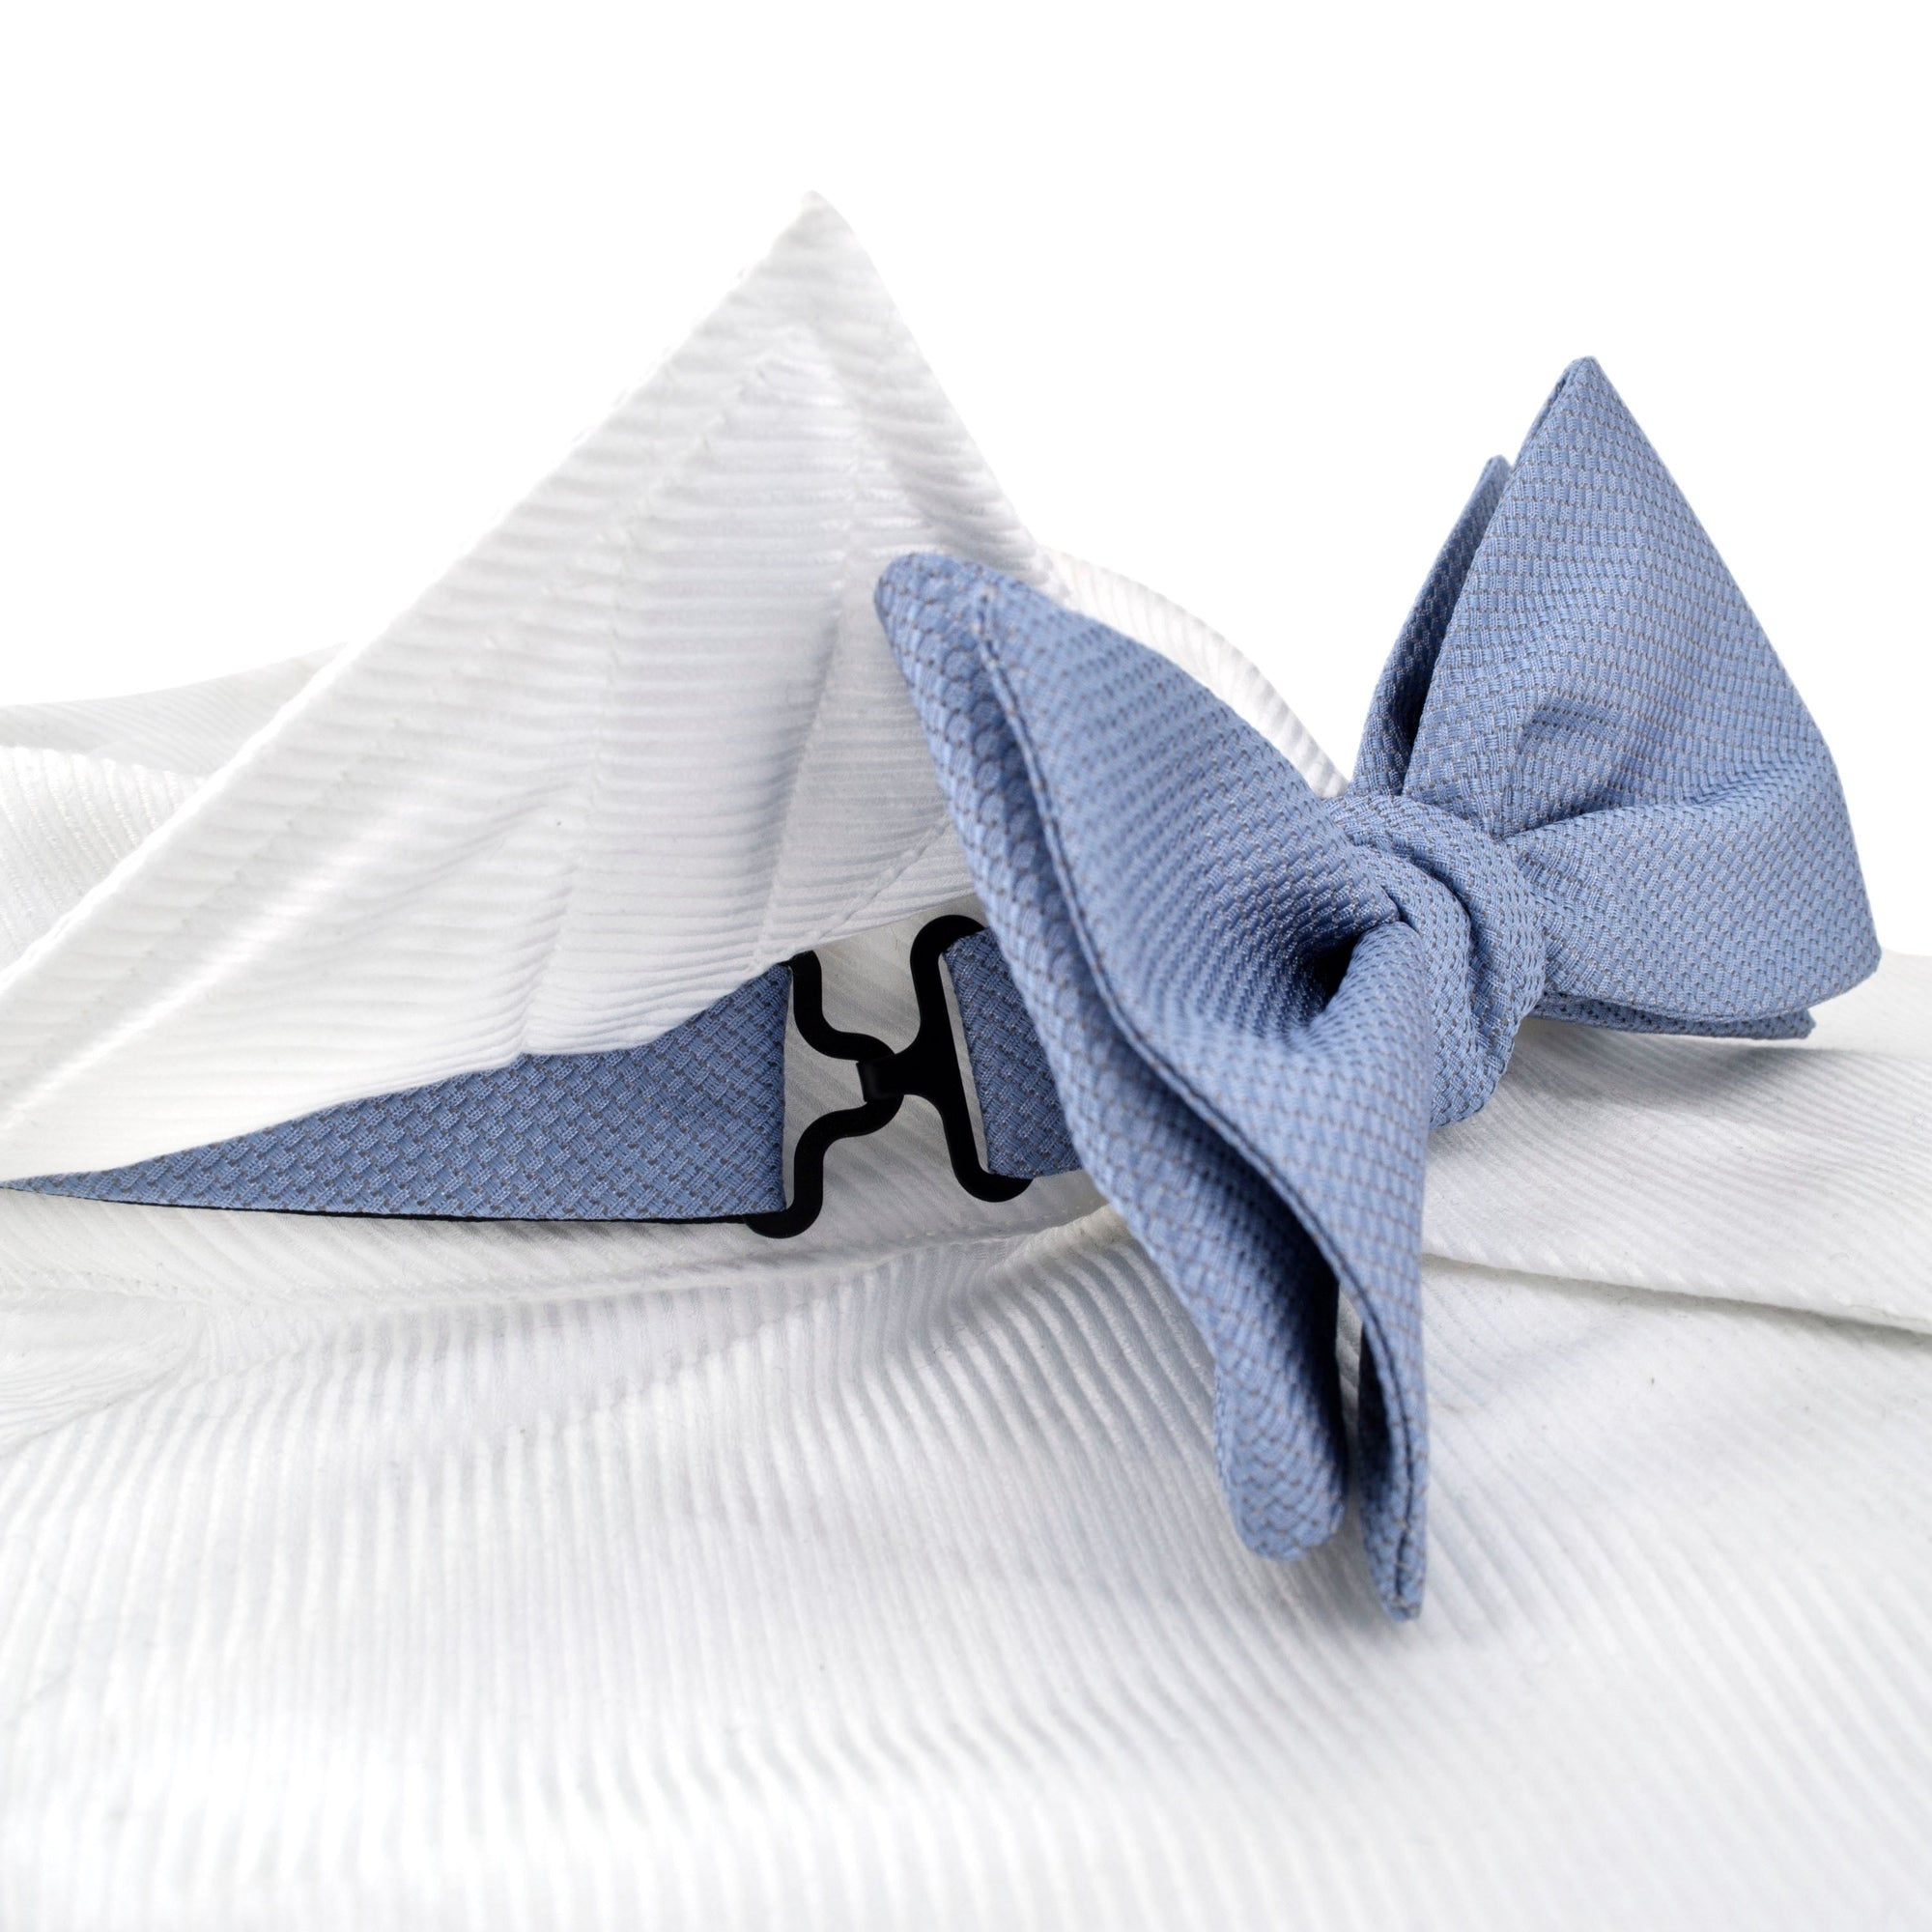 Light Sky Blue Textured Self Tie and Ready Made Bow Tie-Bow Ties-A.Azthom-Cufflinks.com.sg